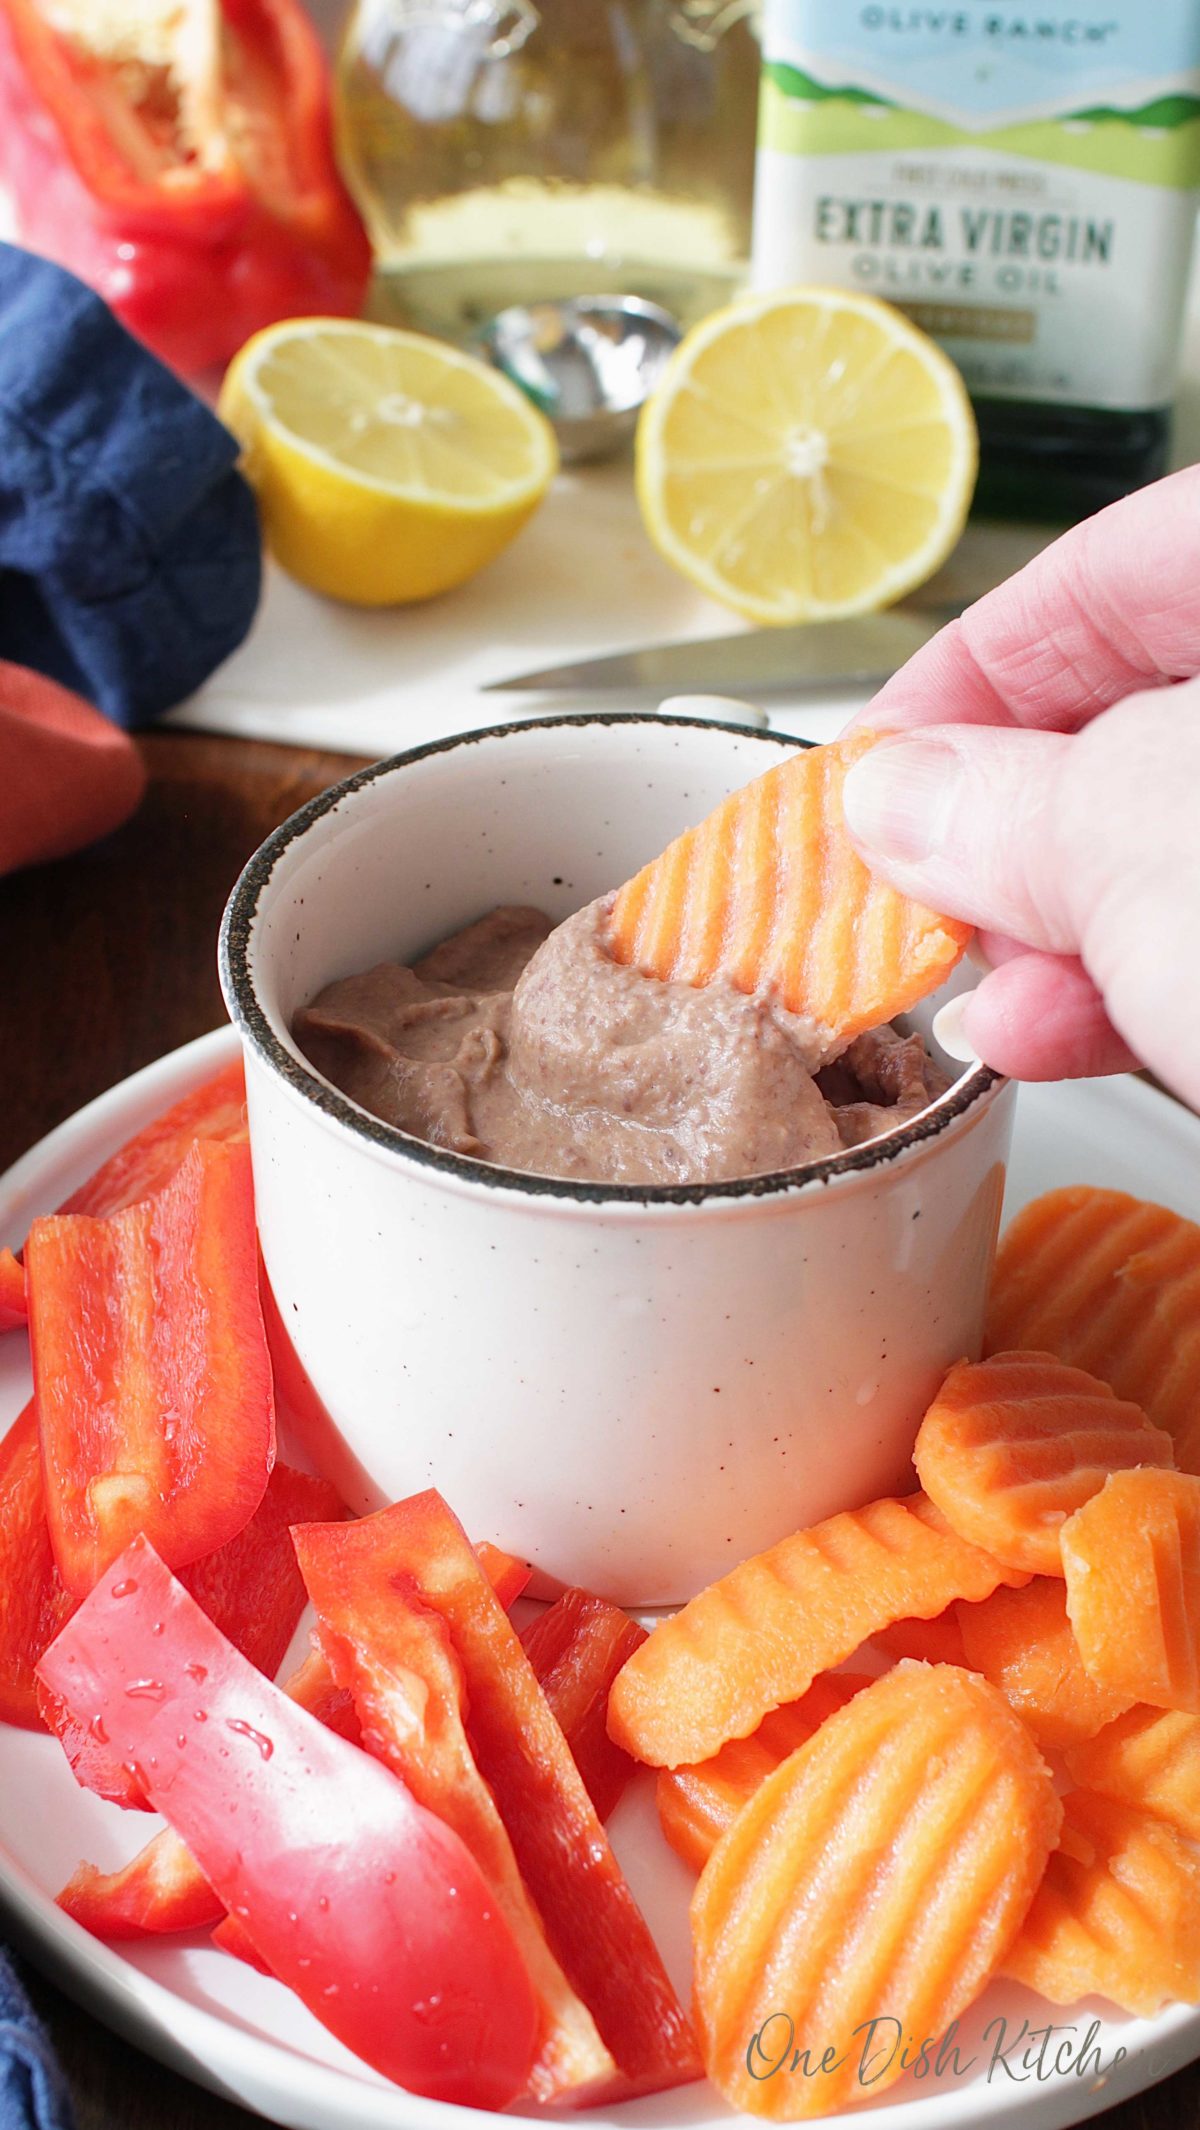 Carrot dipped in a small bowl of black bean hummus plated with sliced carrots and red peppers.